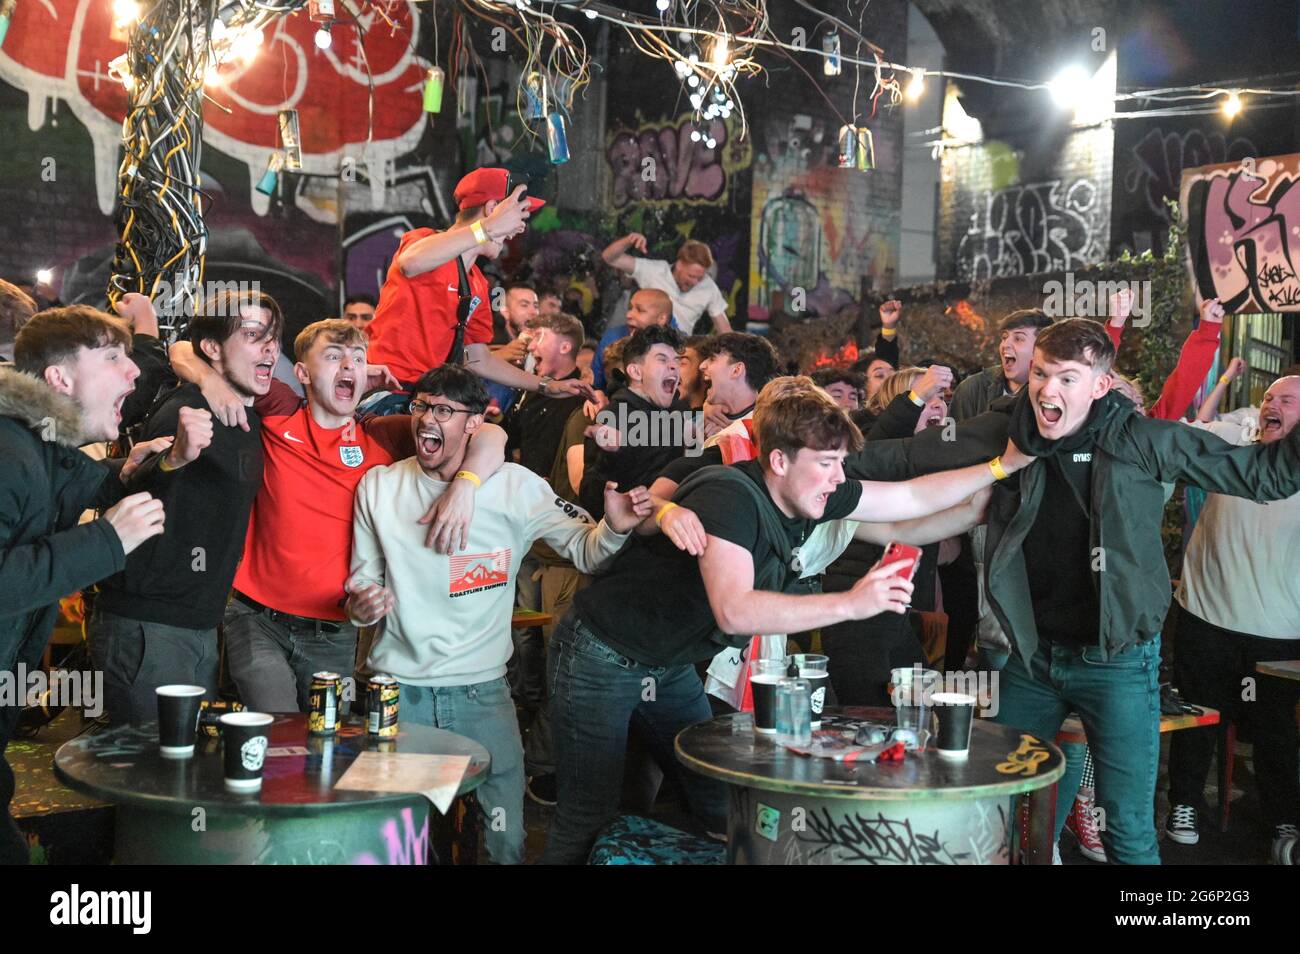 Digbeth, Birmingham, UK July 7th 2021 Fans celebrate a goal against Denmark in the Euro 2020 Semi Finals extra time. The fans erupted as they watched at The Big Fang popup bar under railway arches in Birmingham city centre. Pic by Credit: Sam Holiday/Alamy Live News Stock Photo